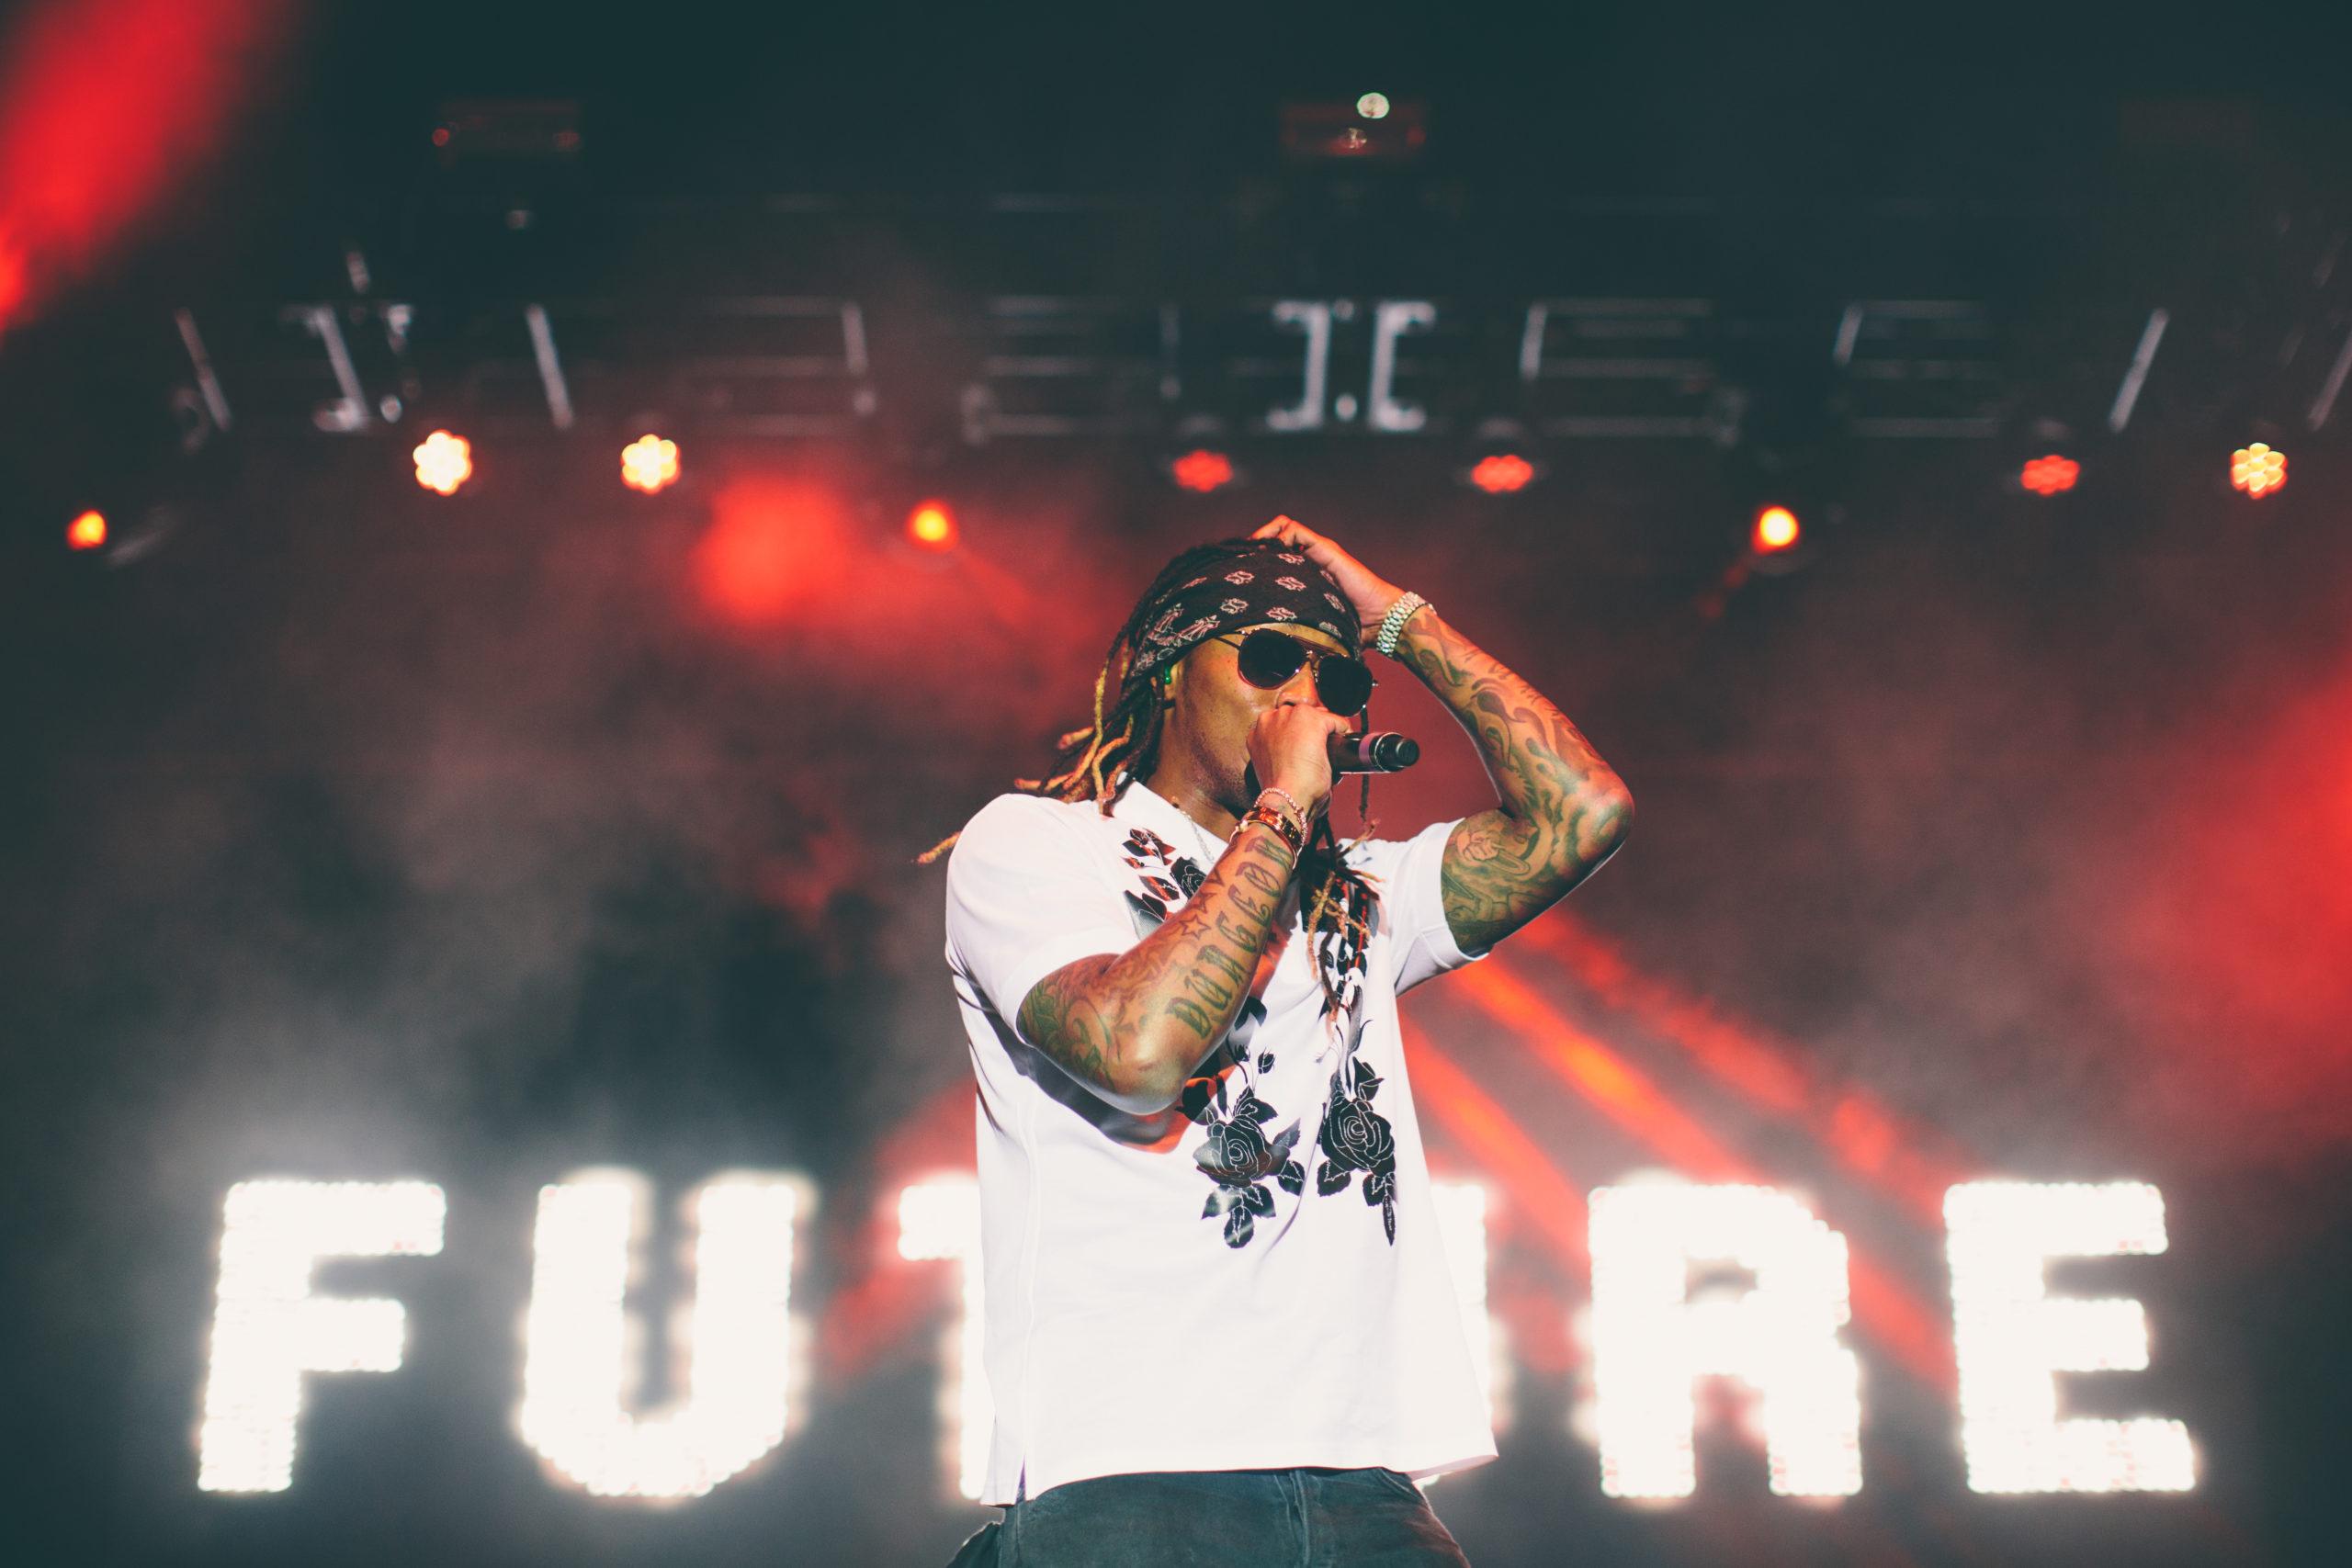 Future%2C+Post+Malone%2C+Rae+Sremmurd%2C+and+many+more+took+over+Dallas+Fair+Park+on+May+13.+